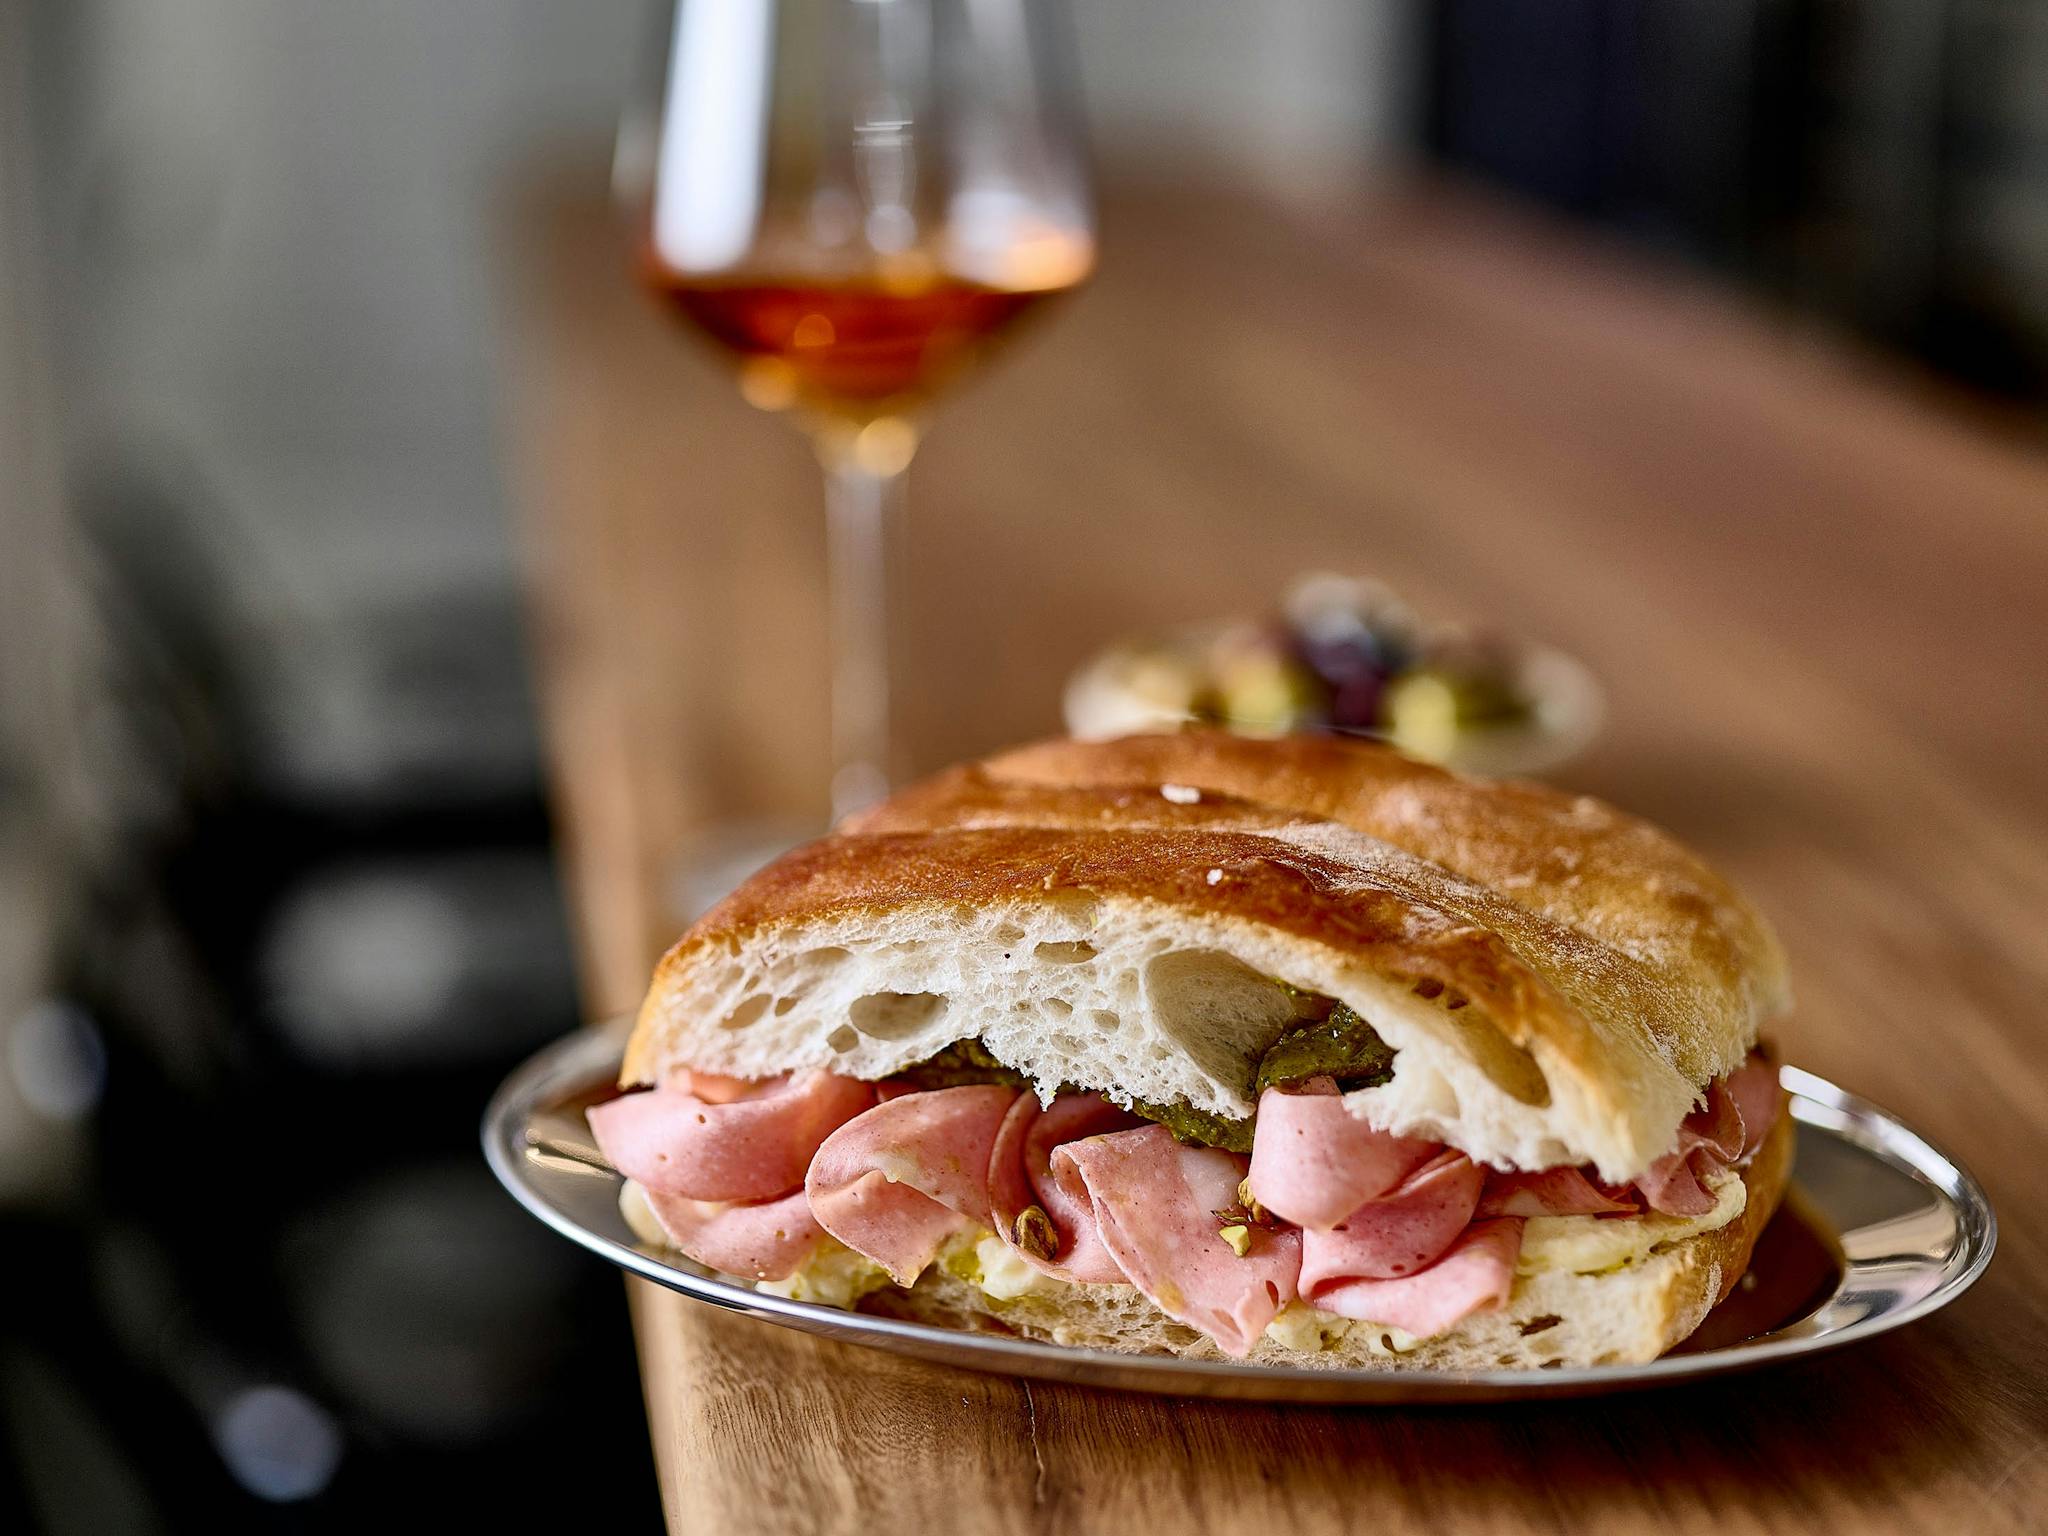 Panini with mortadella and a glass of wine